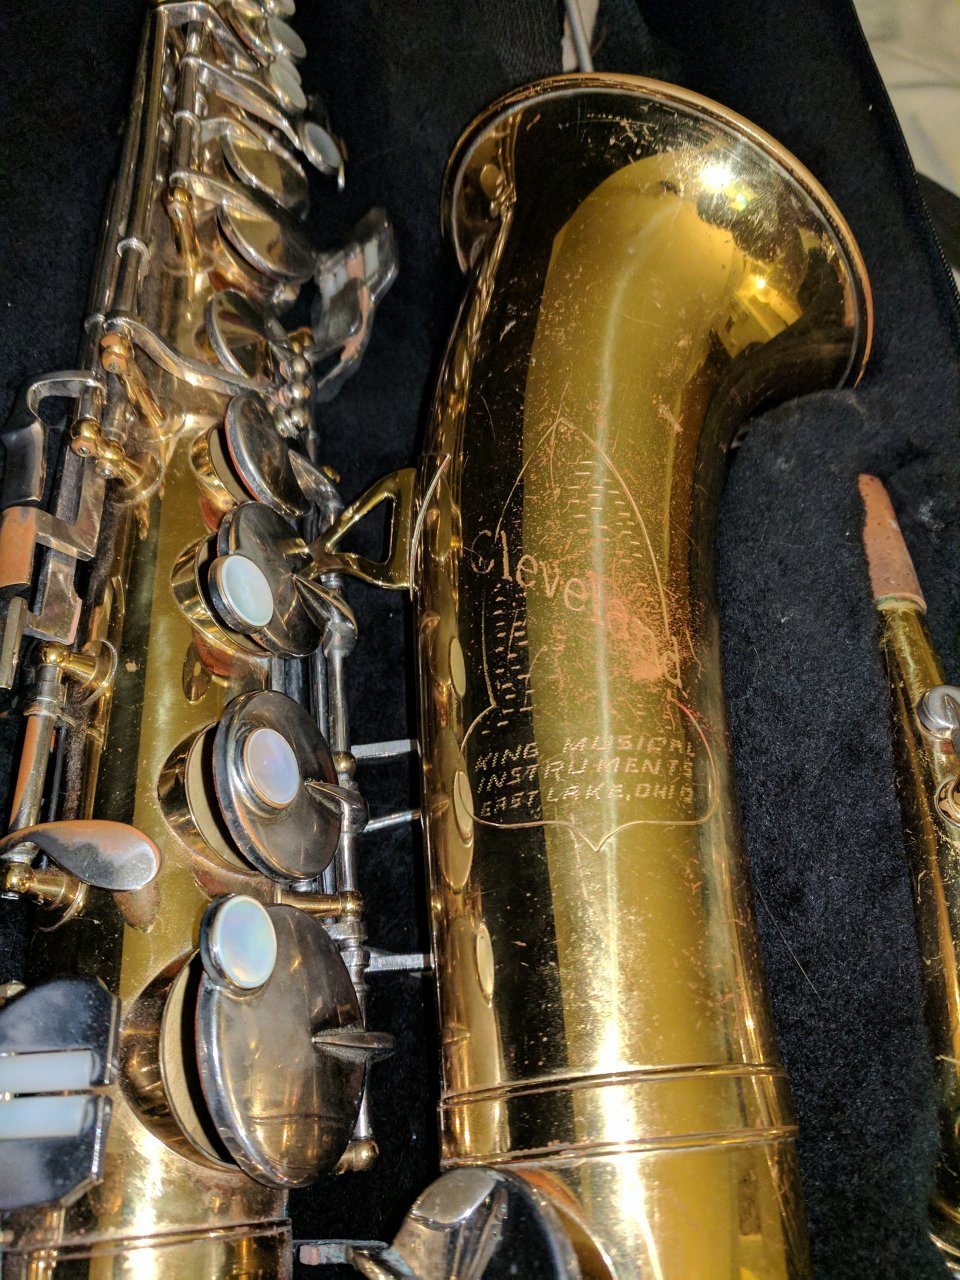 Cleveland Saxophone Serial Numbers